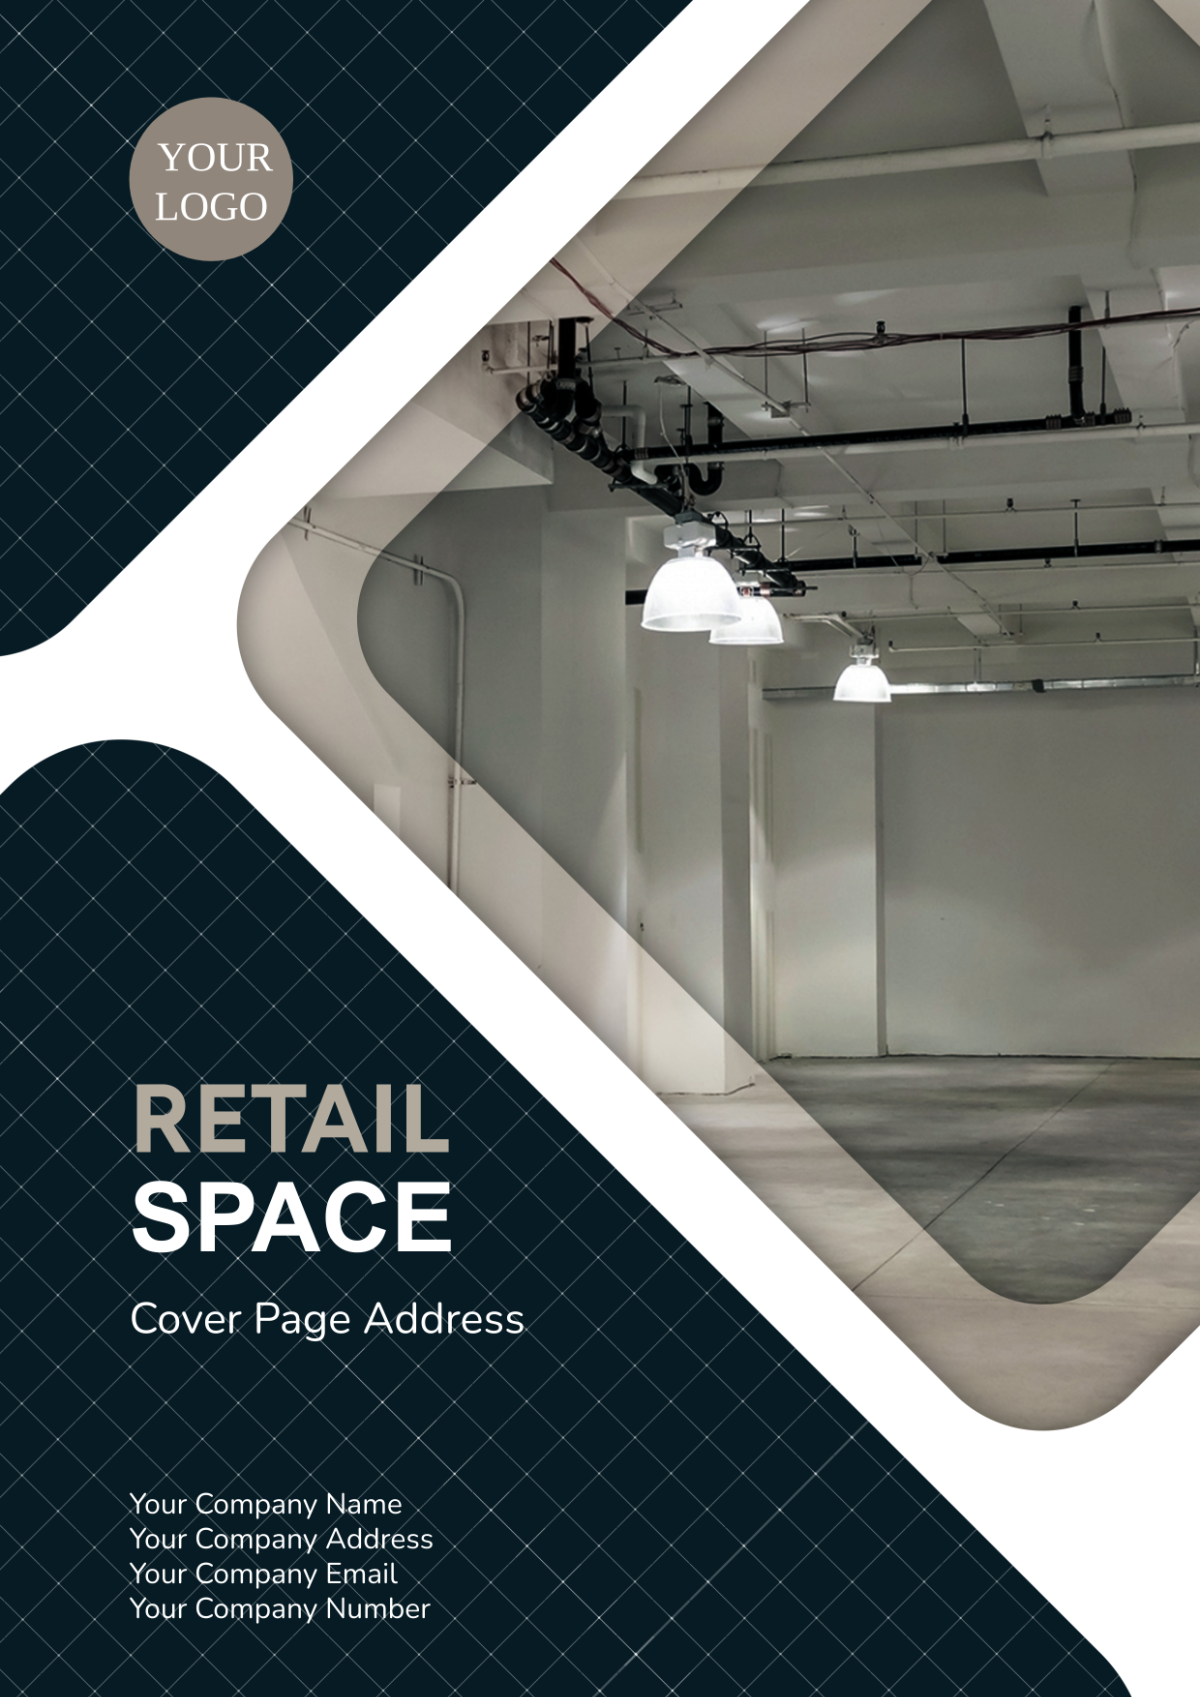 Retail Space Cover Page Address